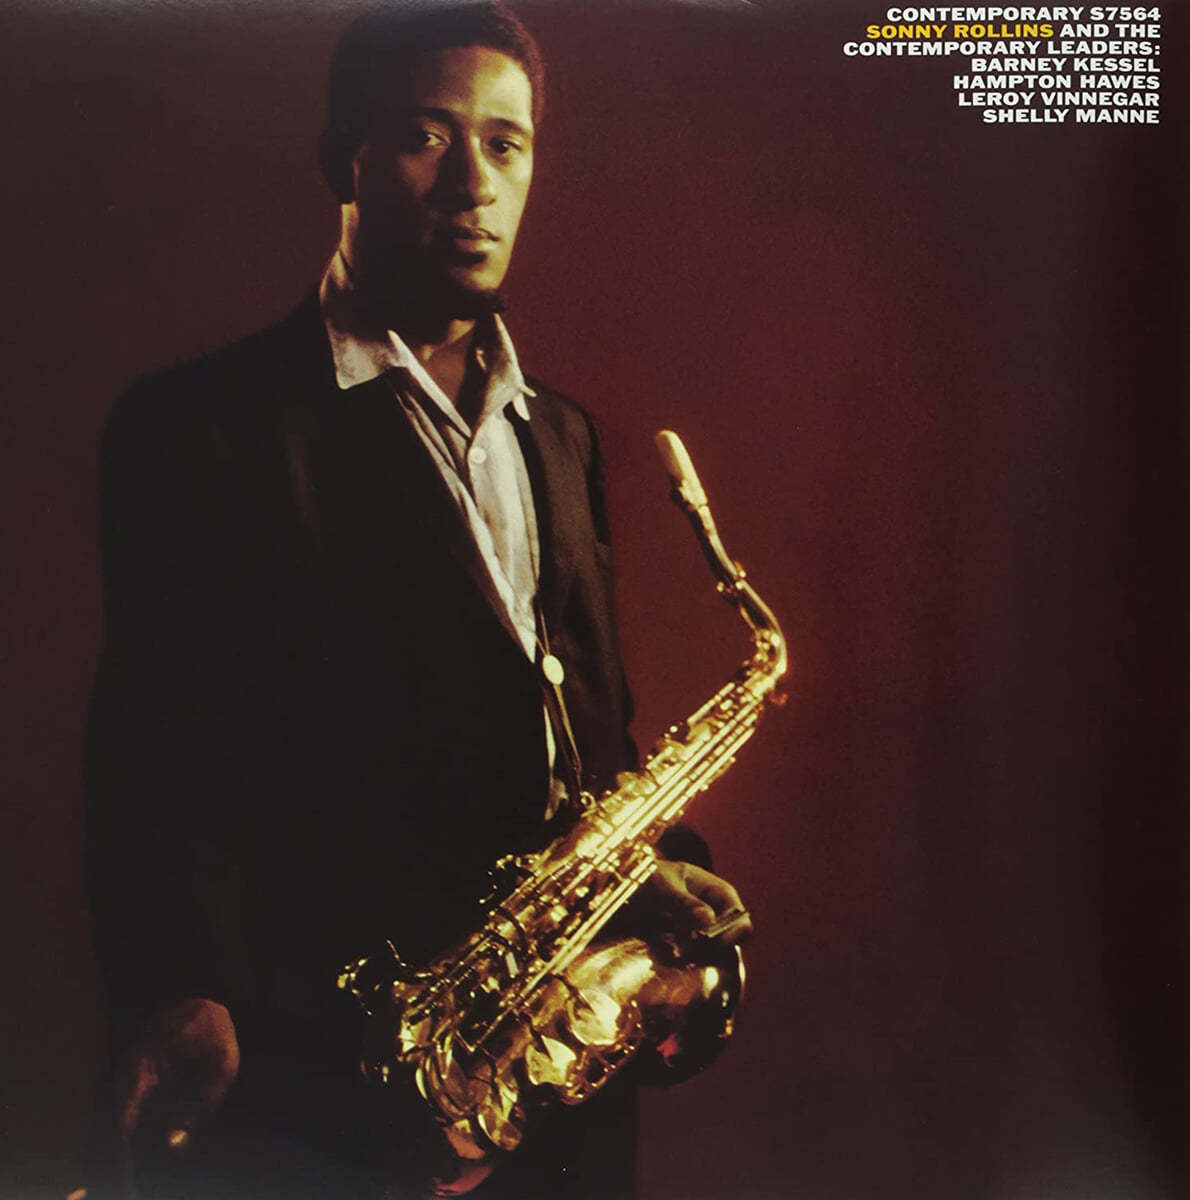 Sonny Rollins (소니 롤린스) - Sonny Rollins &amp; The Contemporary Leaders [LP]